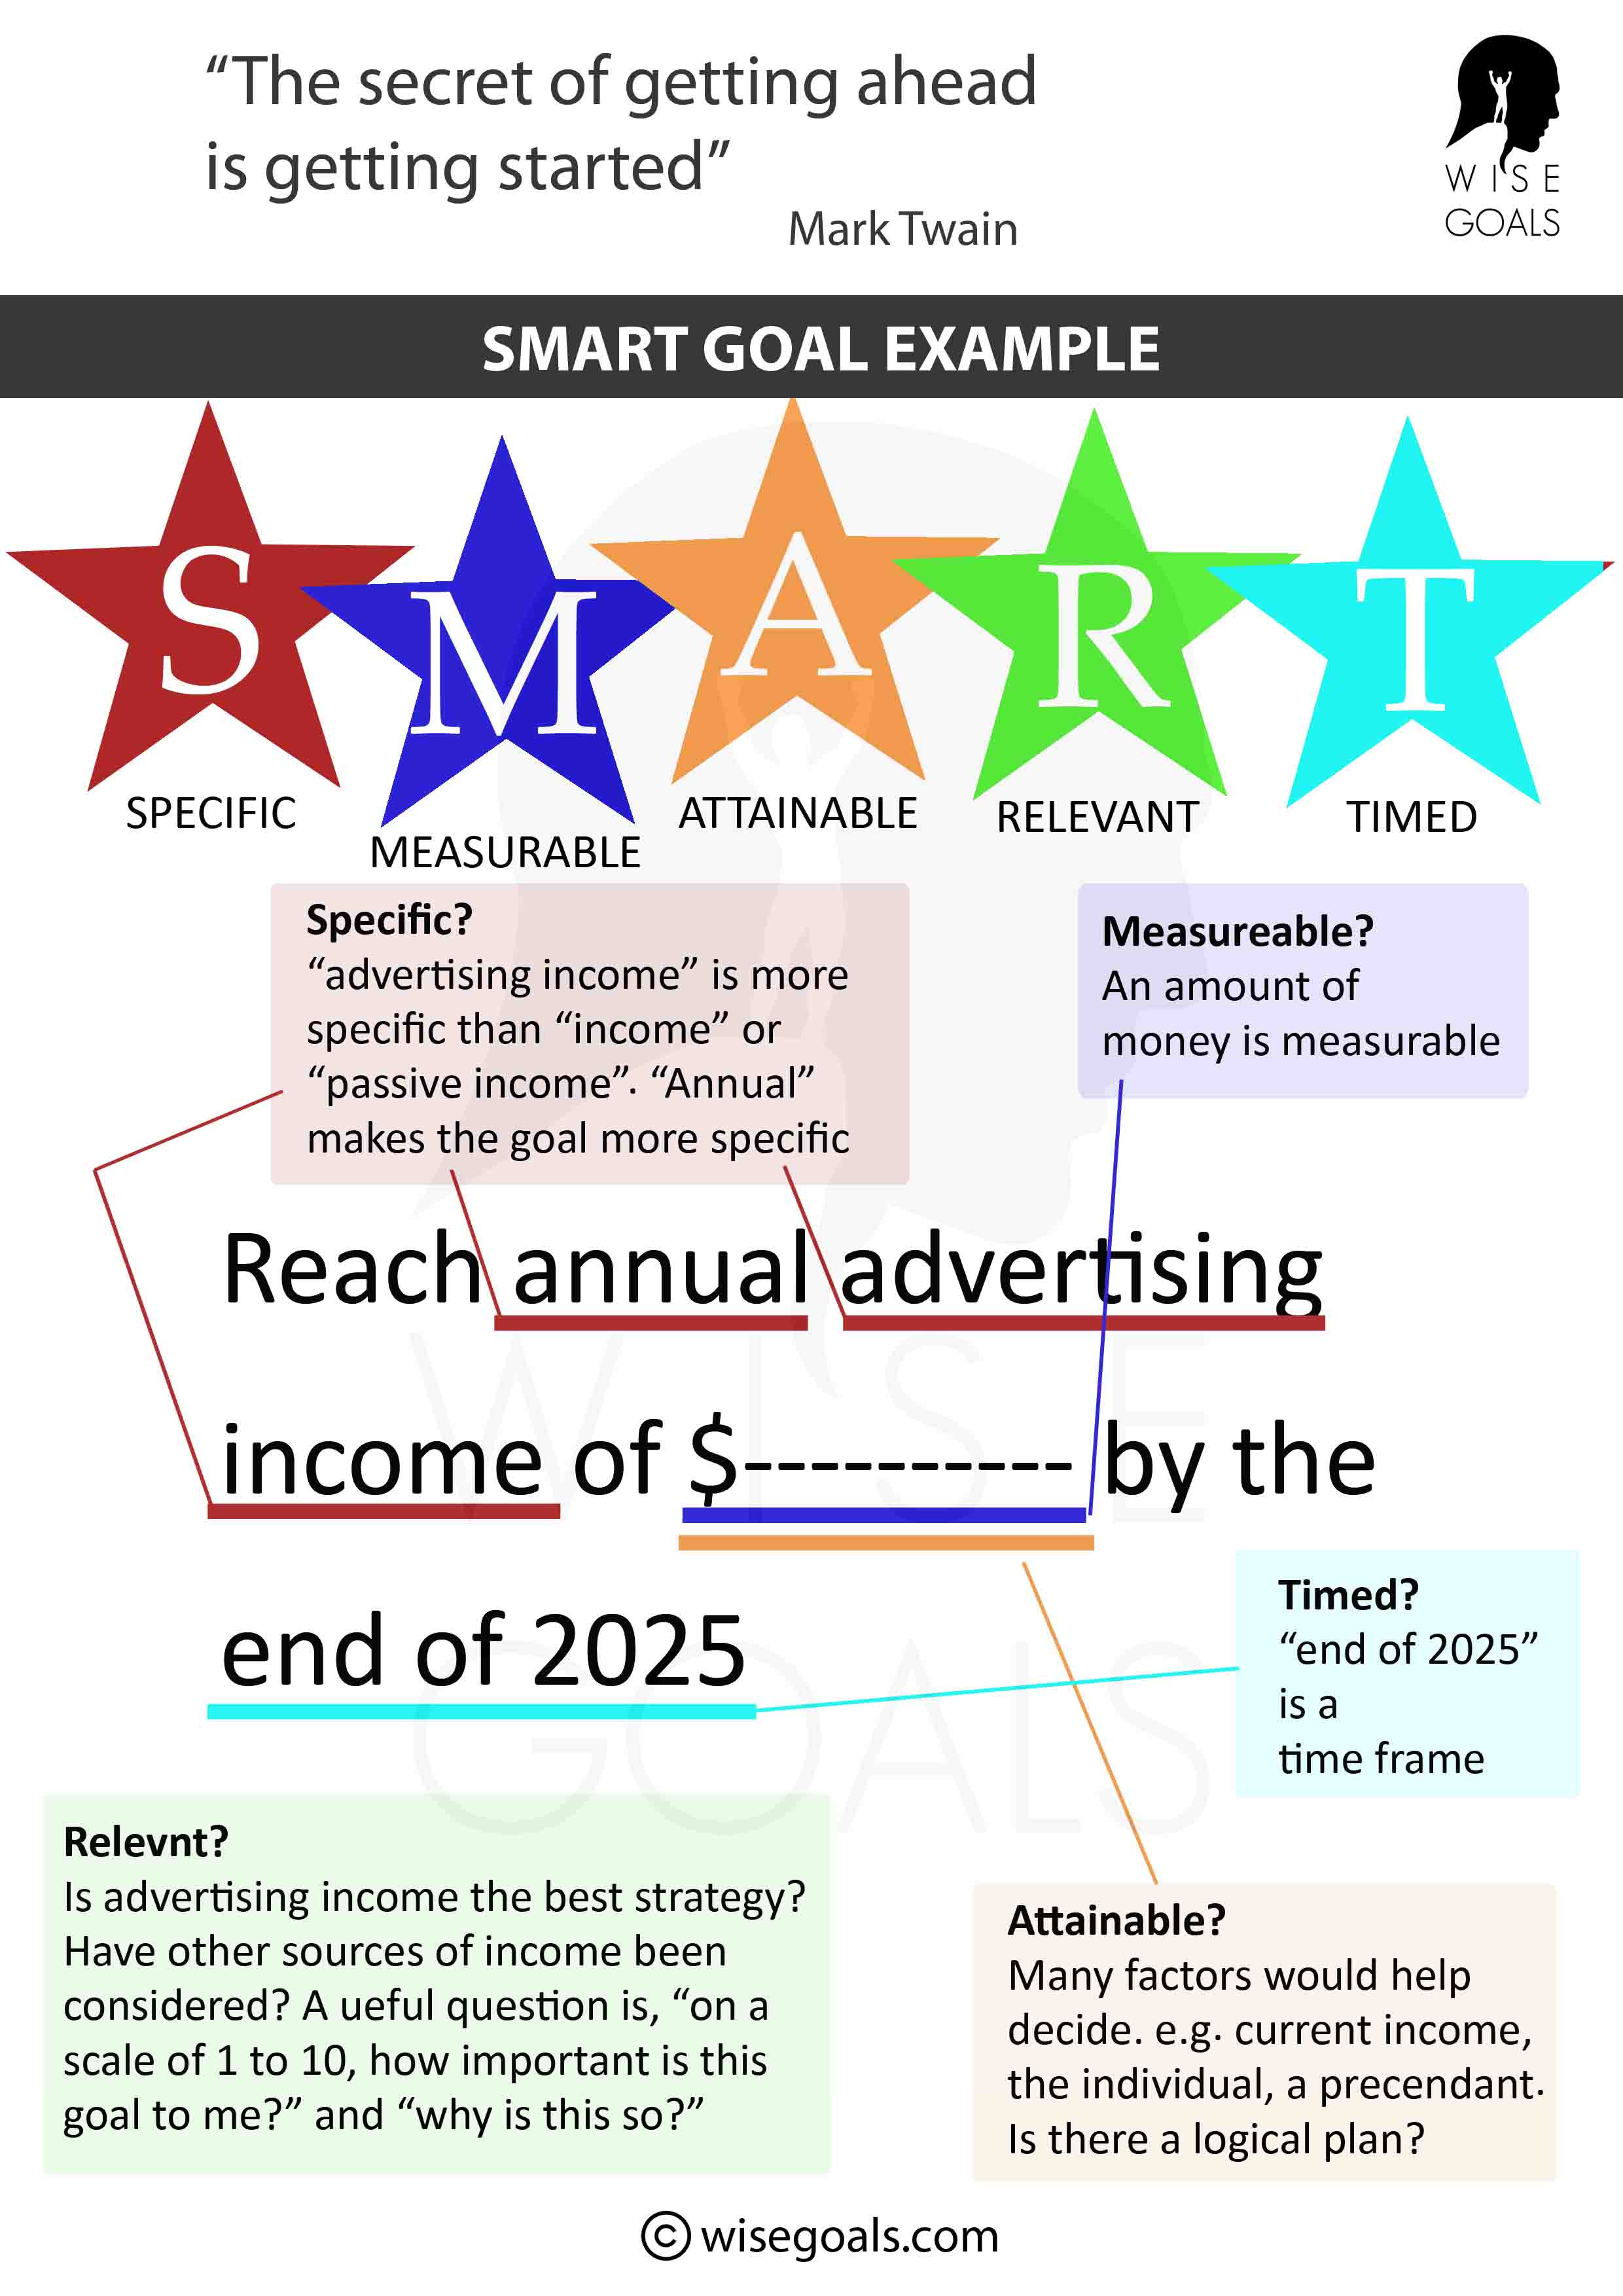 Smart goal example: Business